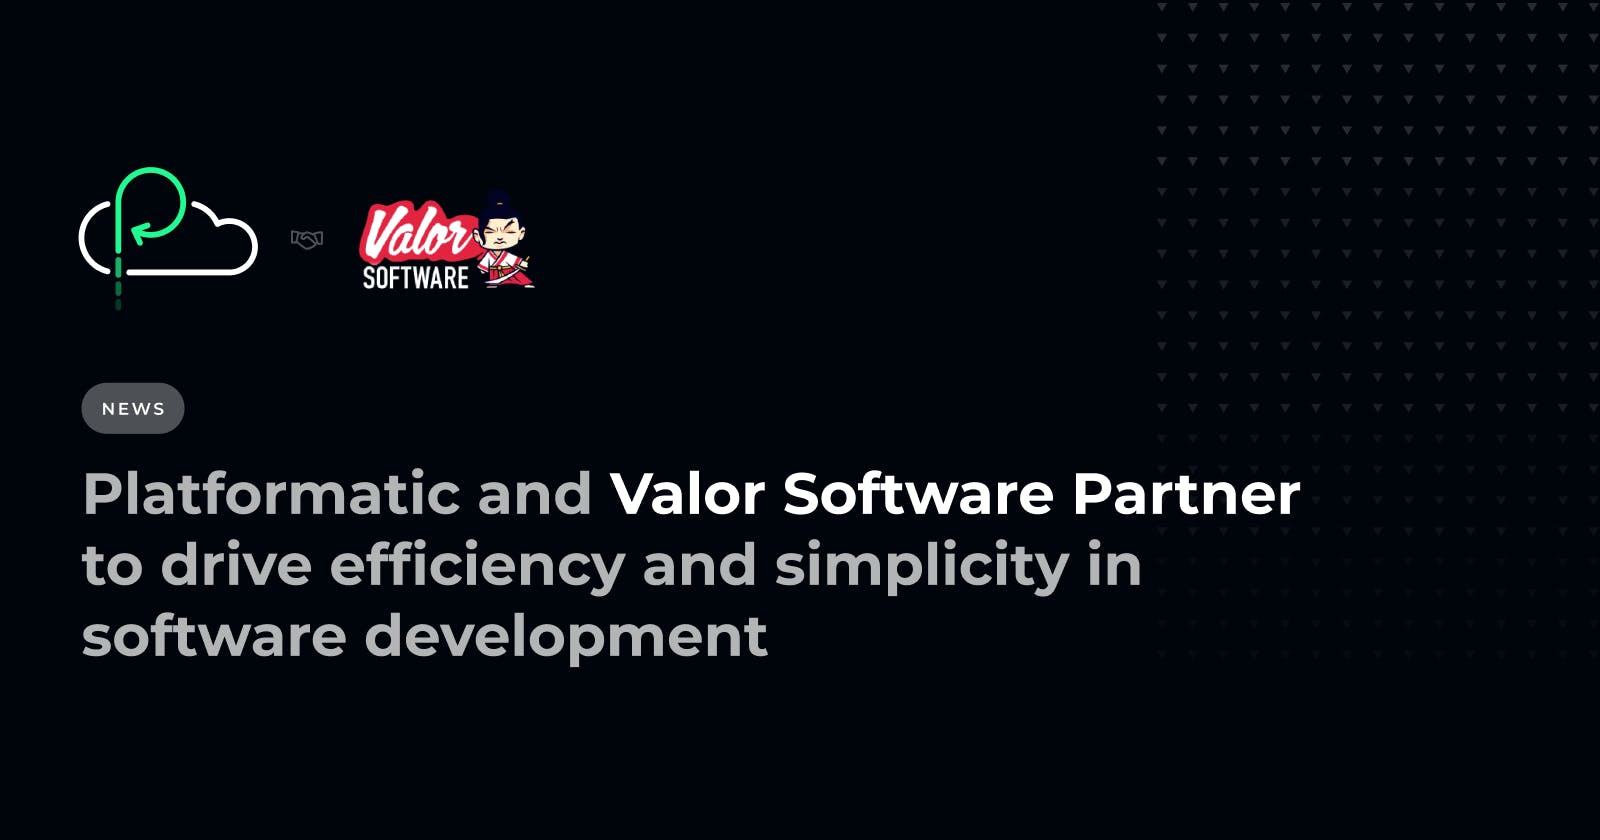 Platformatic and Valor Software Partner to Drive Efficiency and Simplicity in Software Development